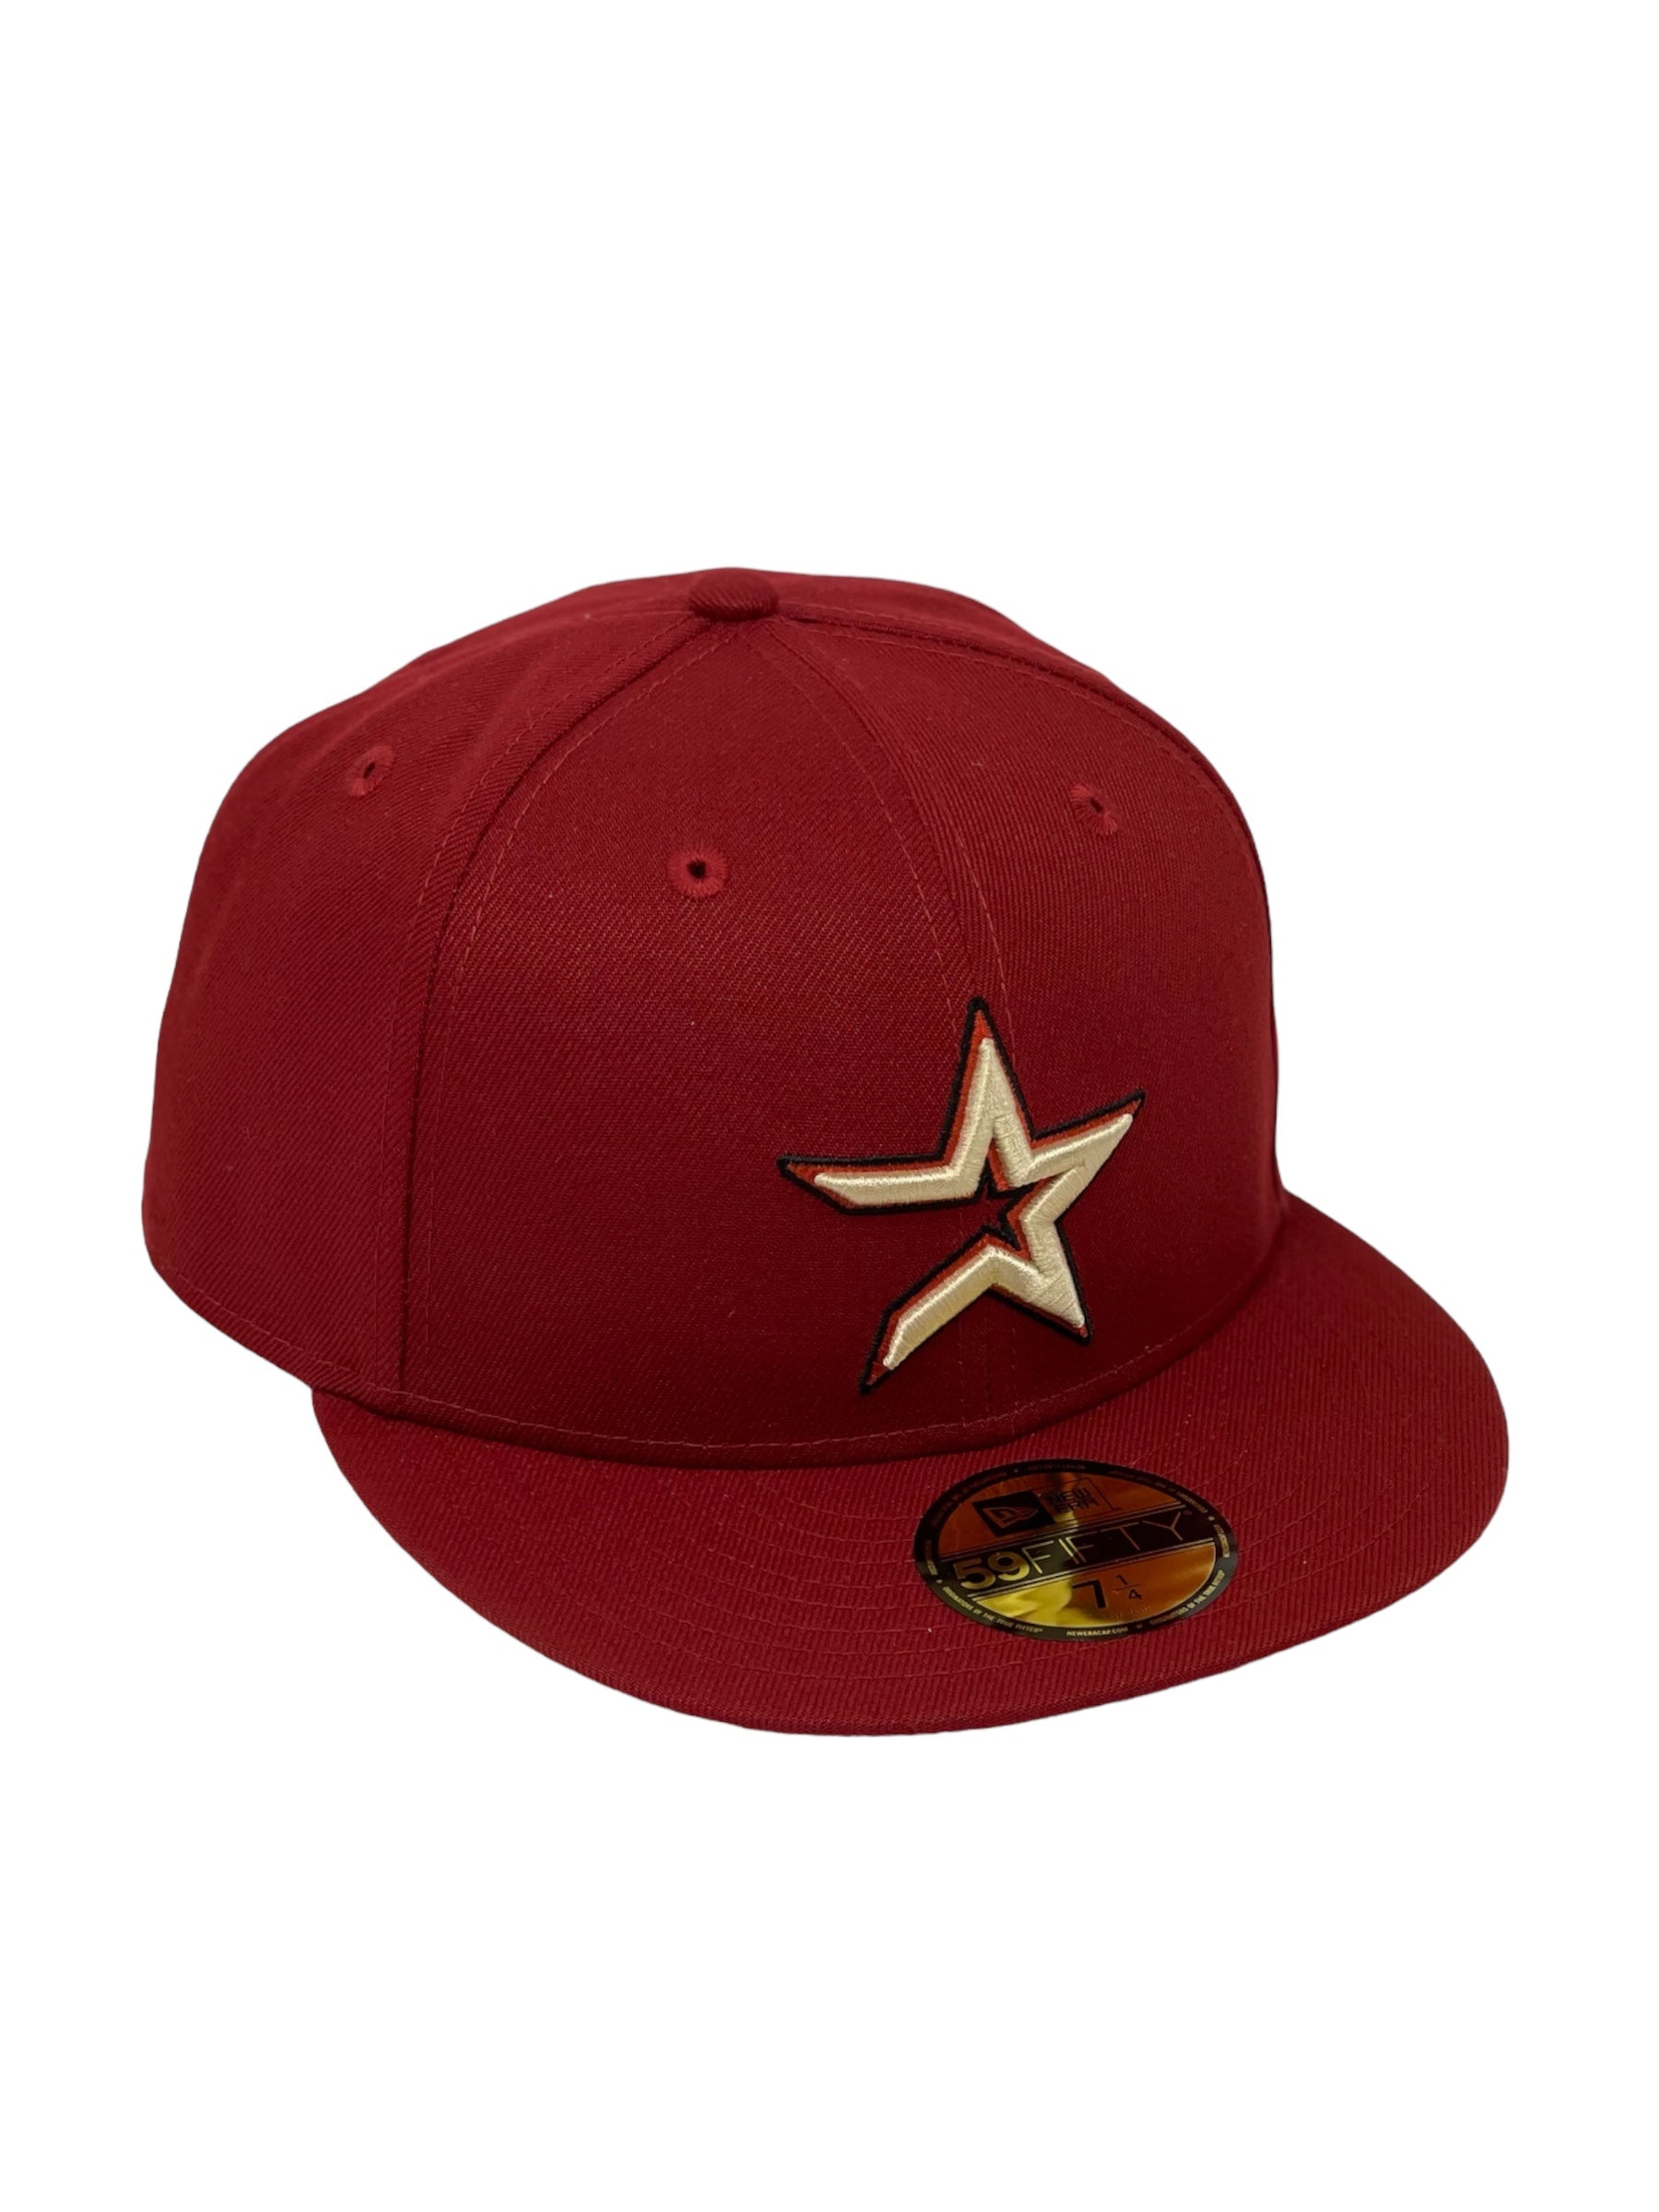 HOUSTON ASTROS (H-RED) (2000-2006 ALT) NEW ERA 59FIFTY FITTED